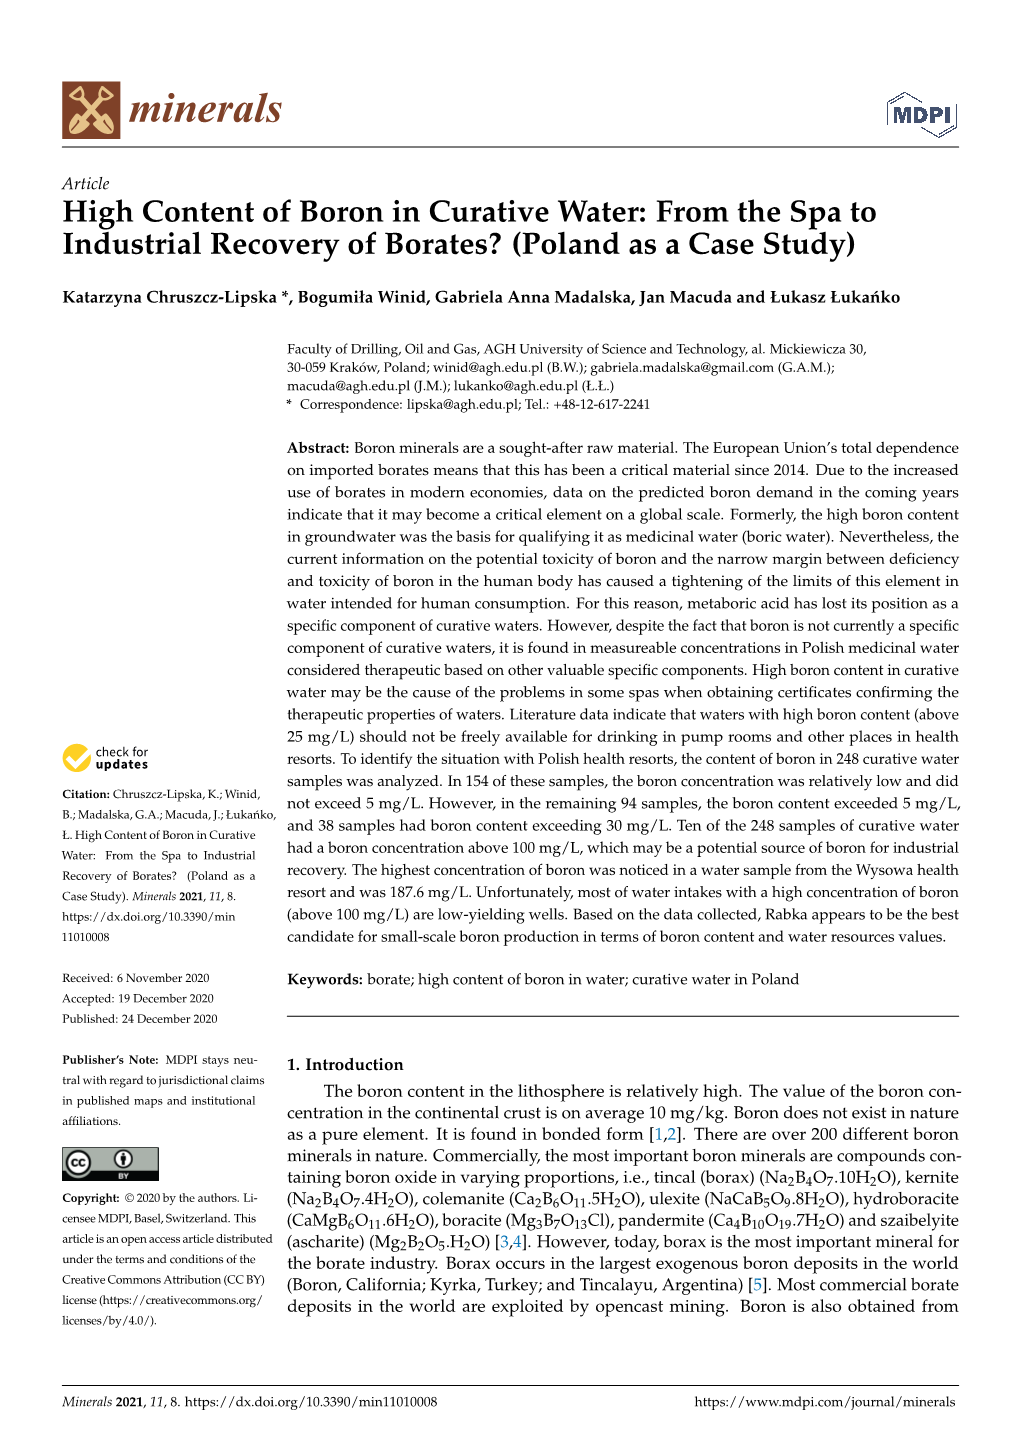 High Content of Boron in Curative Water: from the Spa to Industrial Recovery of Borates? (Poland As a Case Study)